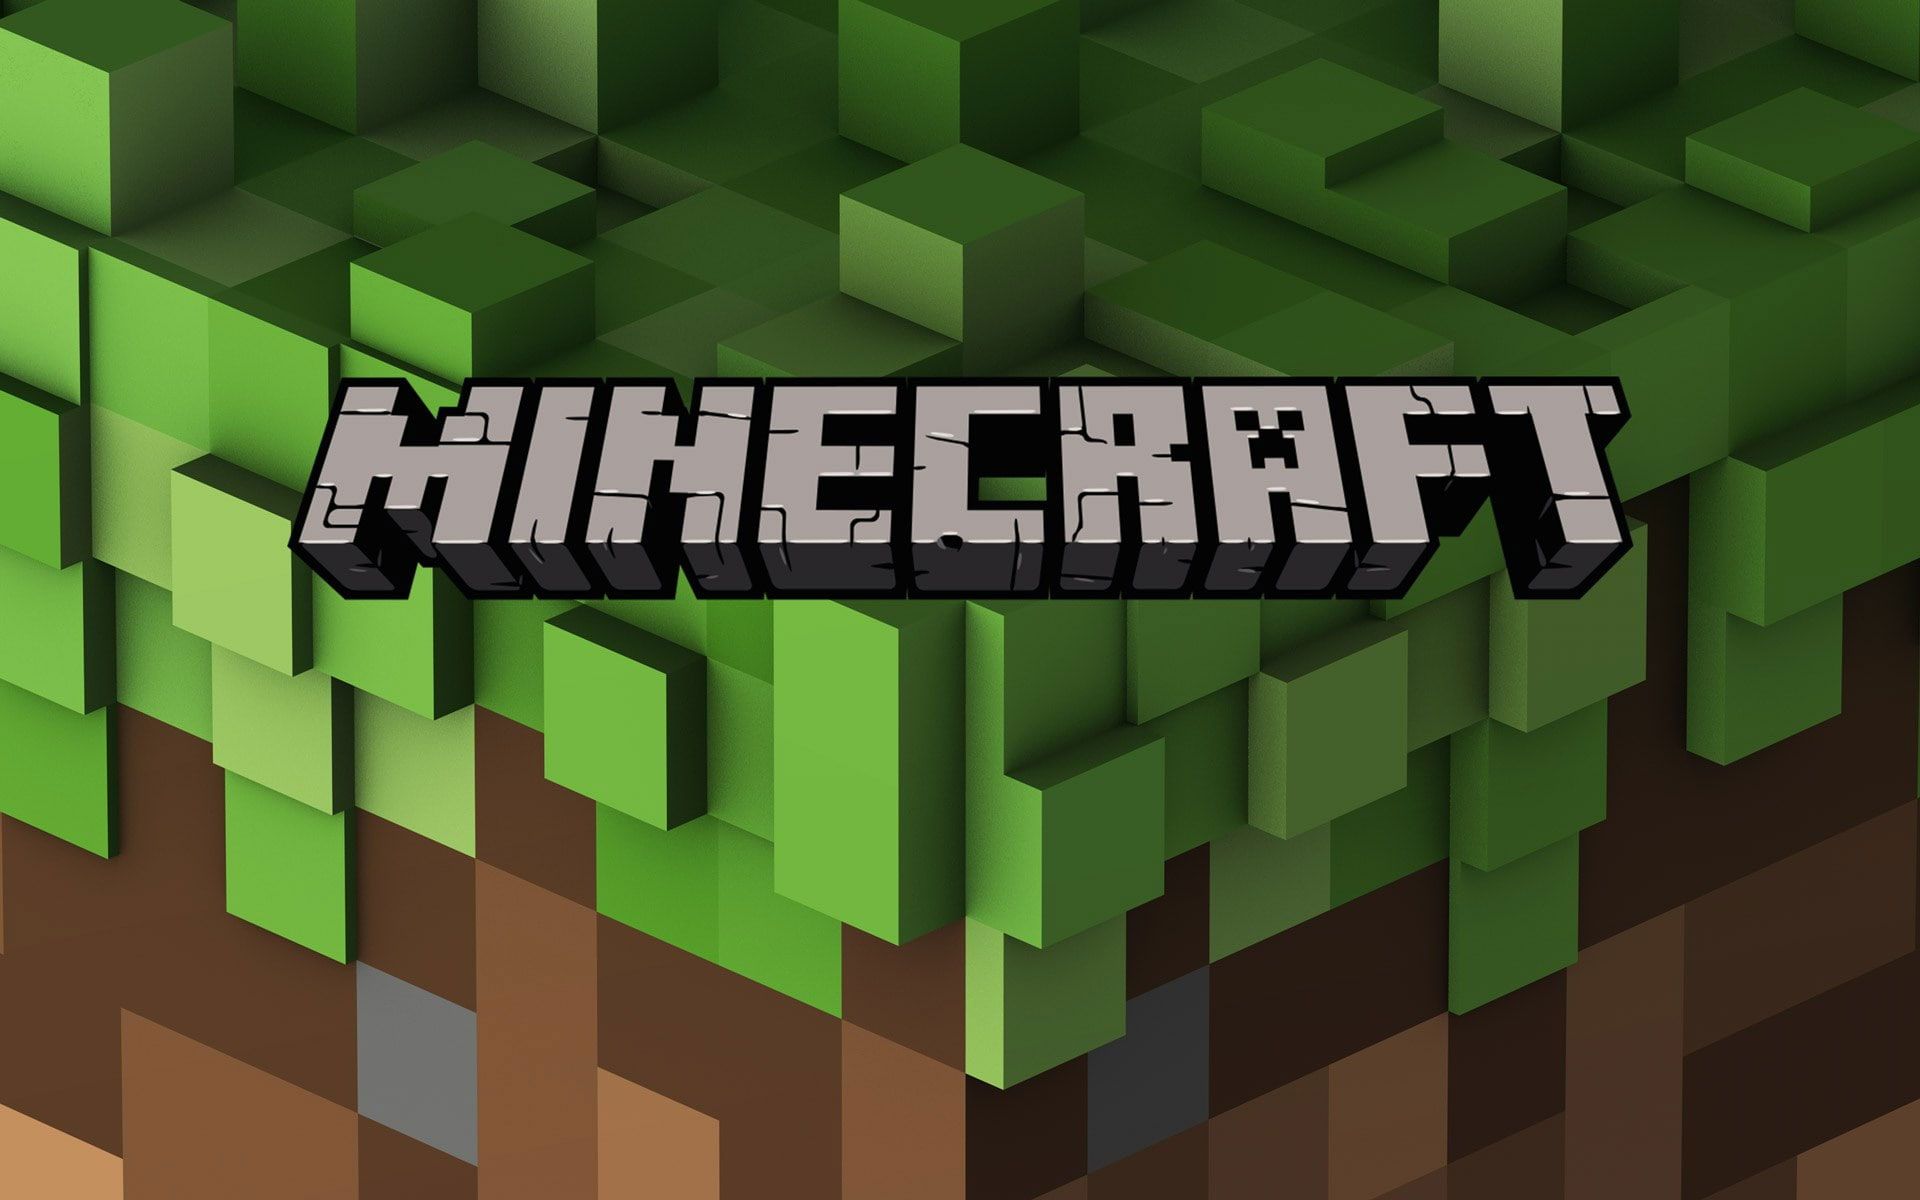 Wallpaper Minecraft Theme Background Image, Green Color